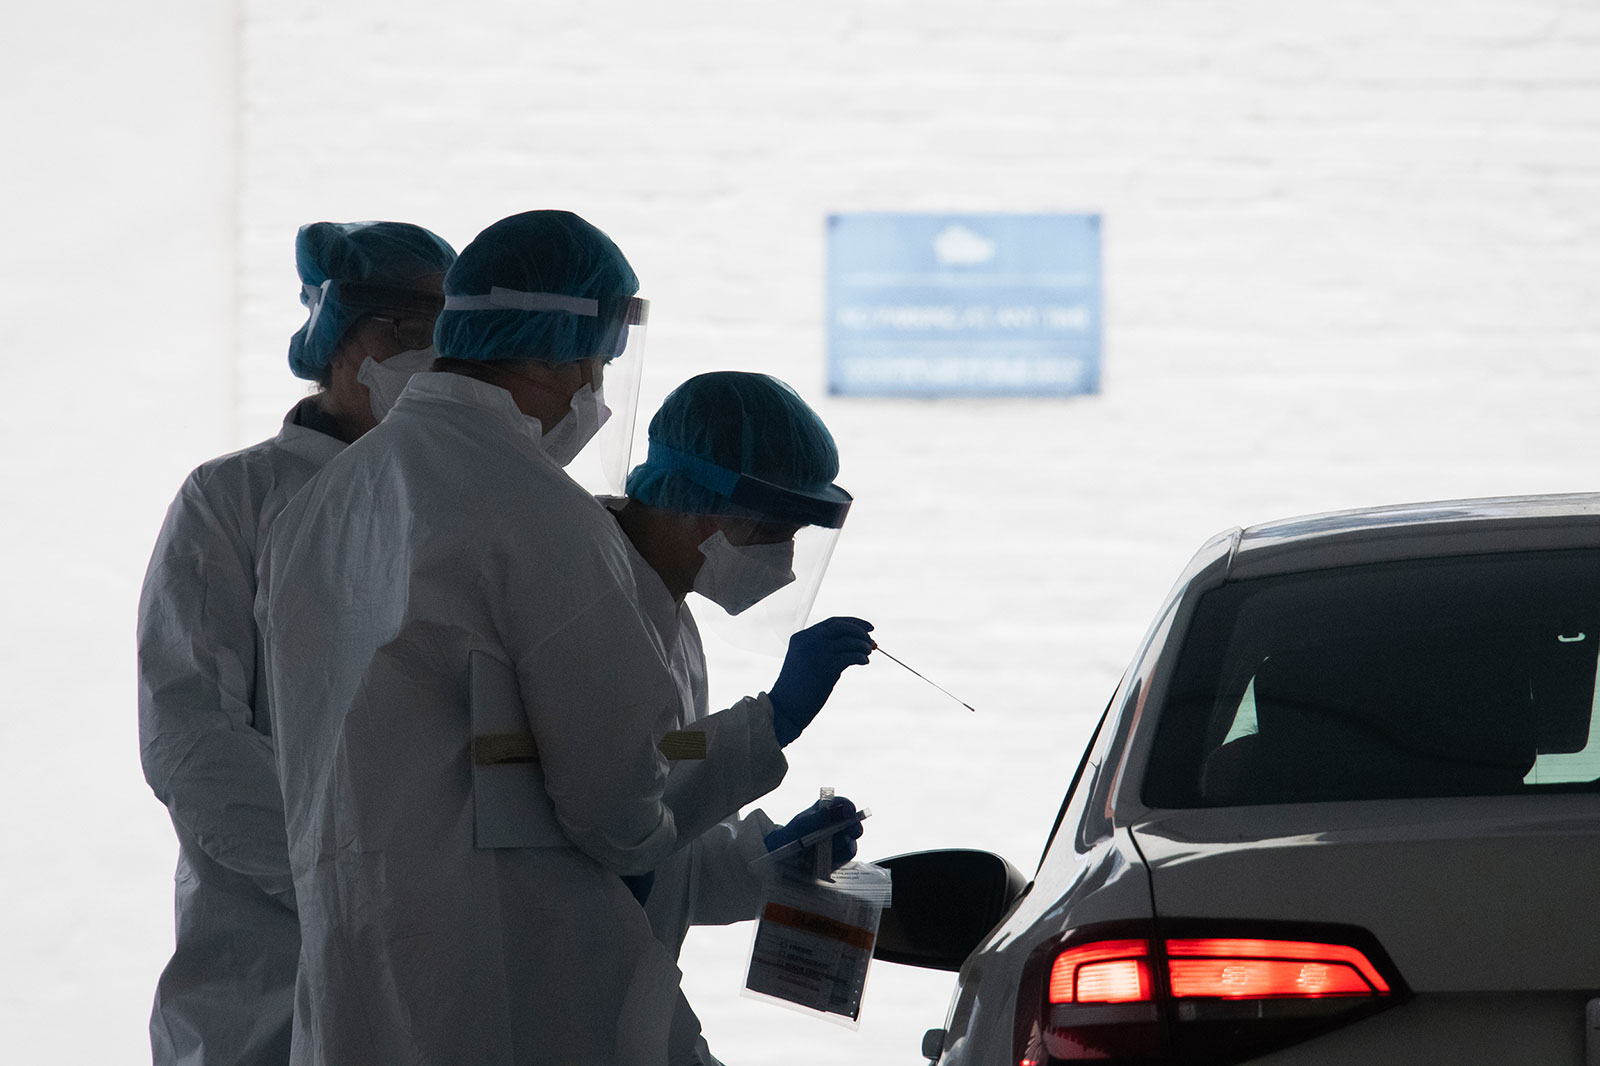 A healthcare worker administers a coronavirus test at a drive-through testing facility at George Washington University in Washington, DC, last month.